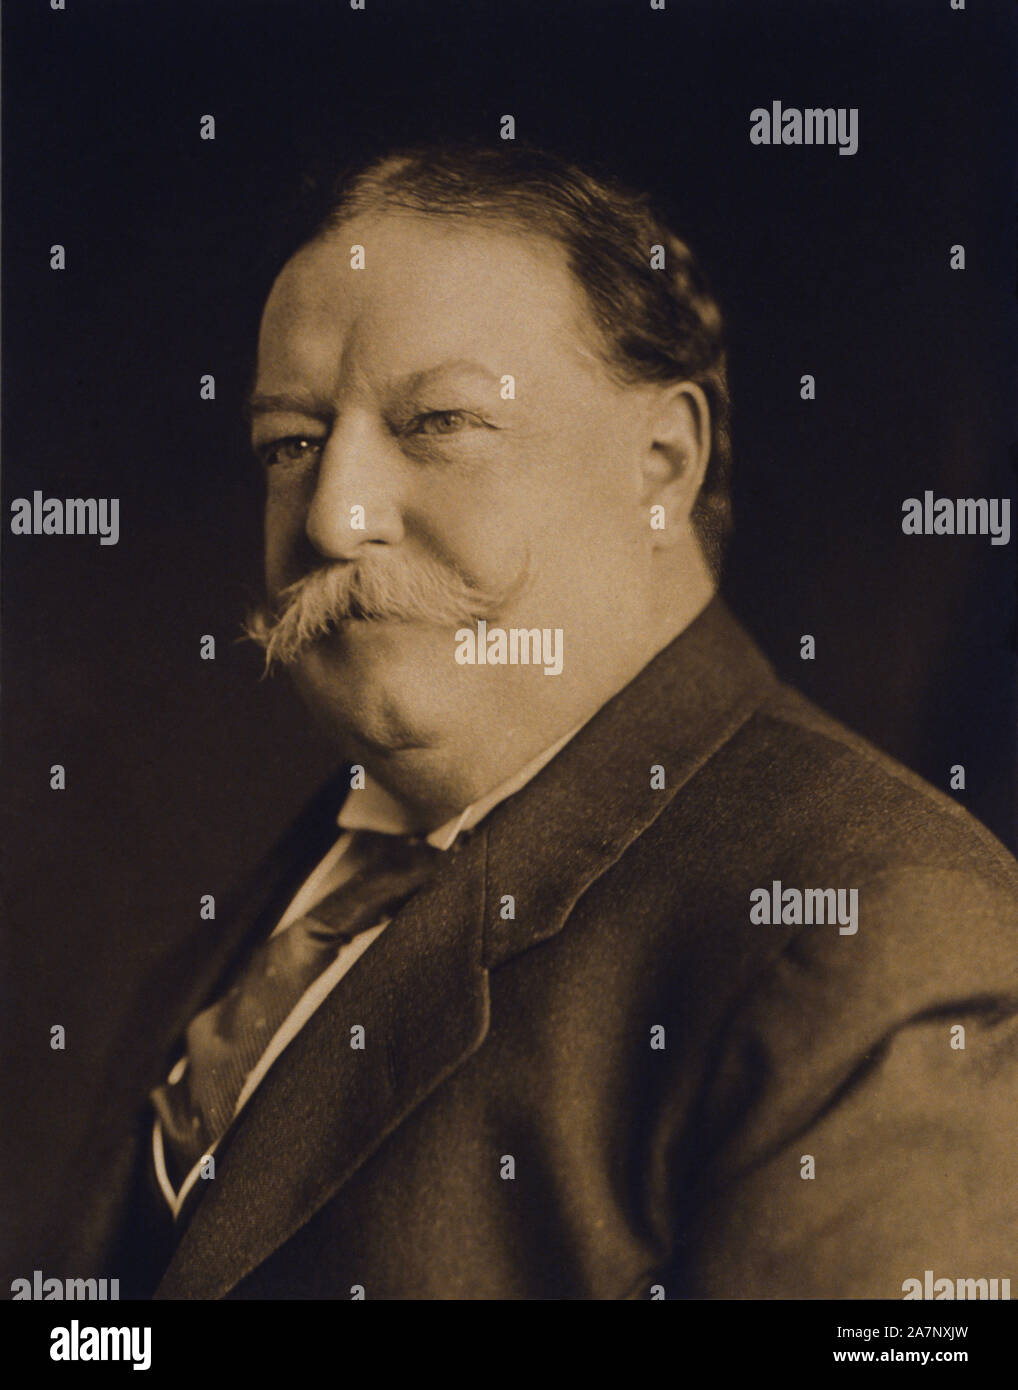 William Howard Taft (1857-1930), 27th President of the United States 1909-1913, 10th Chief Justice of the United States 1921-1930, Head and Shoulders Portrait, 1909 Stock Photo